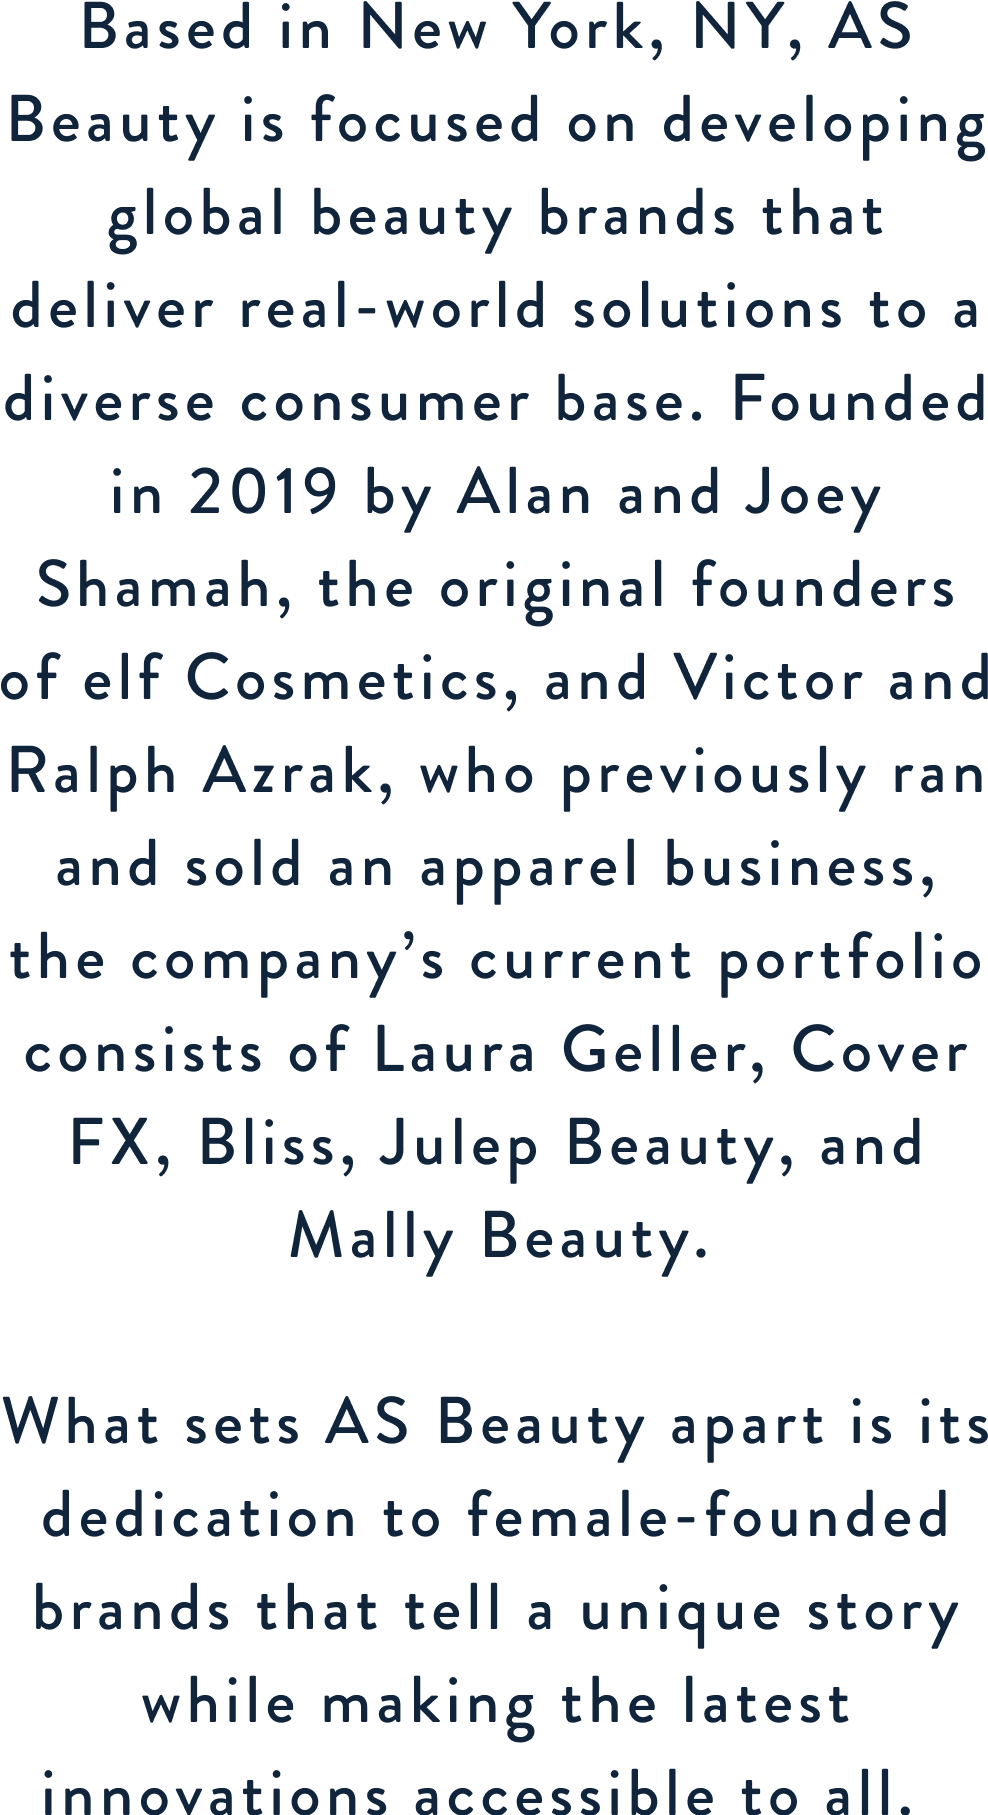 Based in New York, NY, AS Beauty is focused on developing global beauty brands that deliver real-world solutions to a diverse consumer base. Founded in 2019 by Alan and Joey Shamah, the original founders of elf Cosmetics, and Victor and Ralph Azrak, who previously ran and sold an apparel business, the company’s current portfolio consists of Laura Geller, Cover FX, Bliss, Julep Beauty and Mally Beauty.

What sets AS Beauty apart is its dedication to female-founded brands that tell a unique story while making the latest innovations accessible to all.